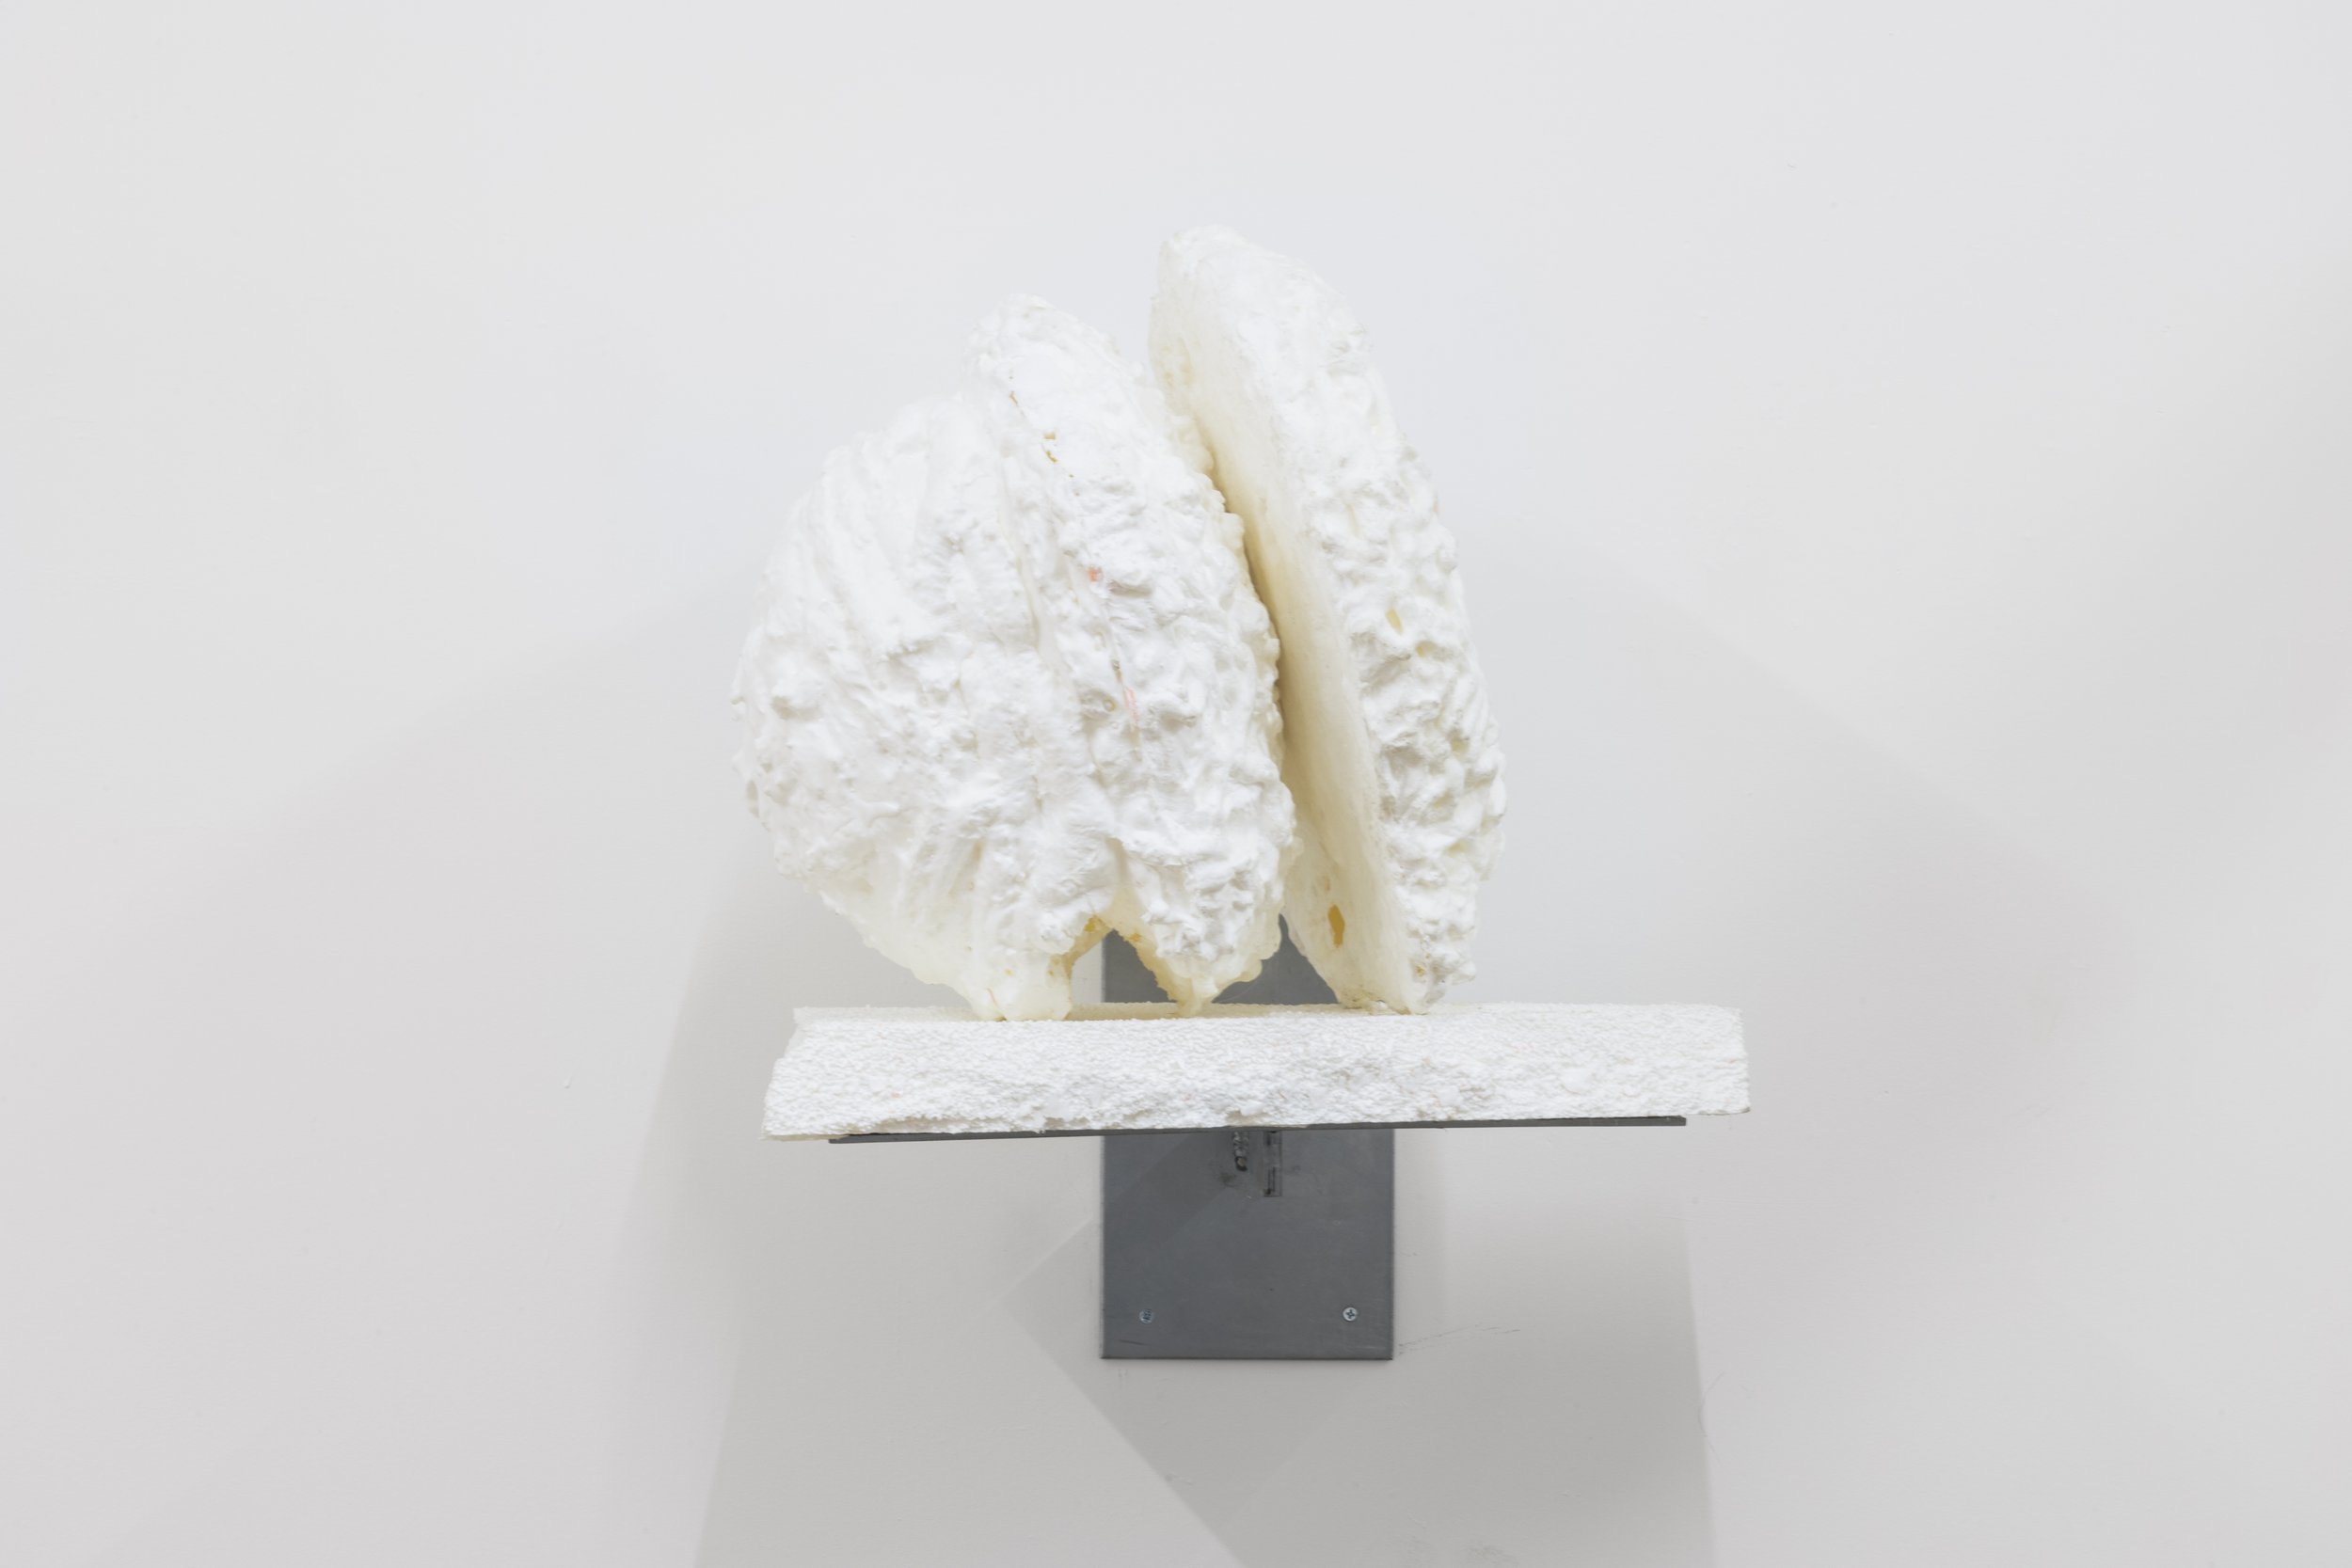   Sculpture Made from Spray Foam , 2021   Cast resin  20 x 20 x 18 inches 